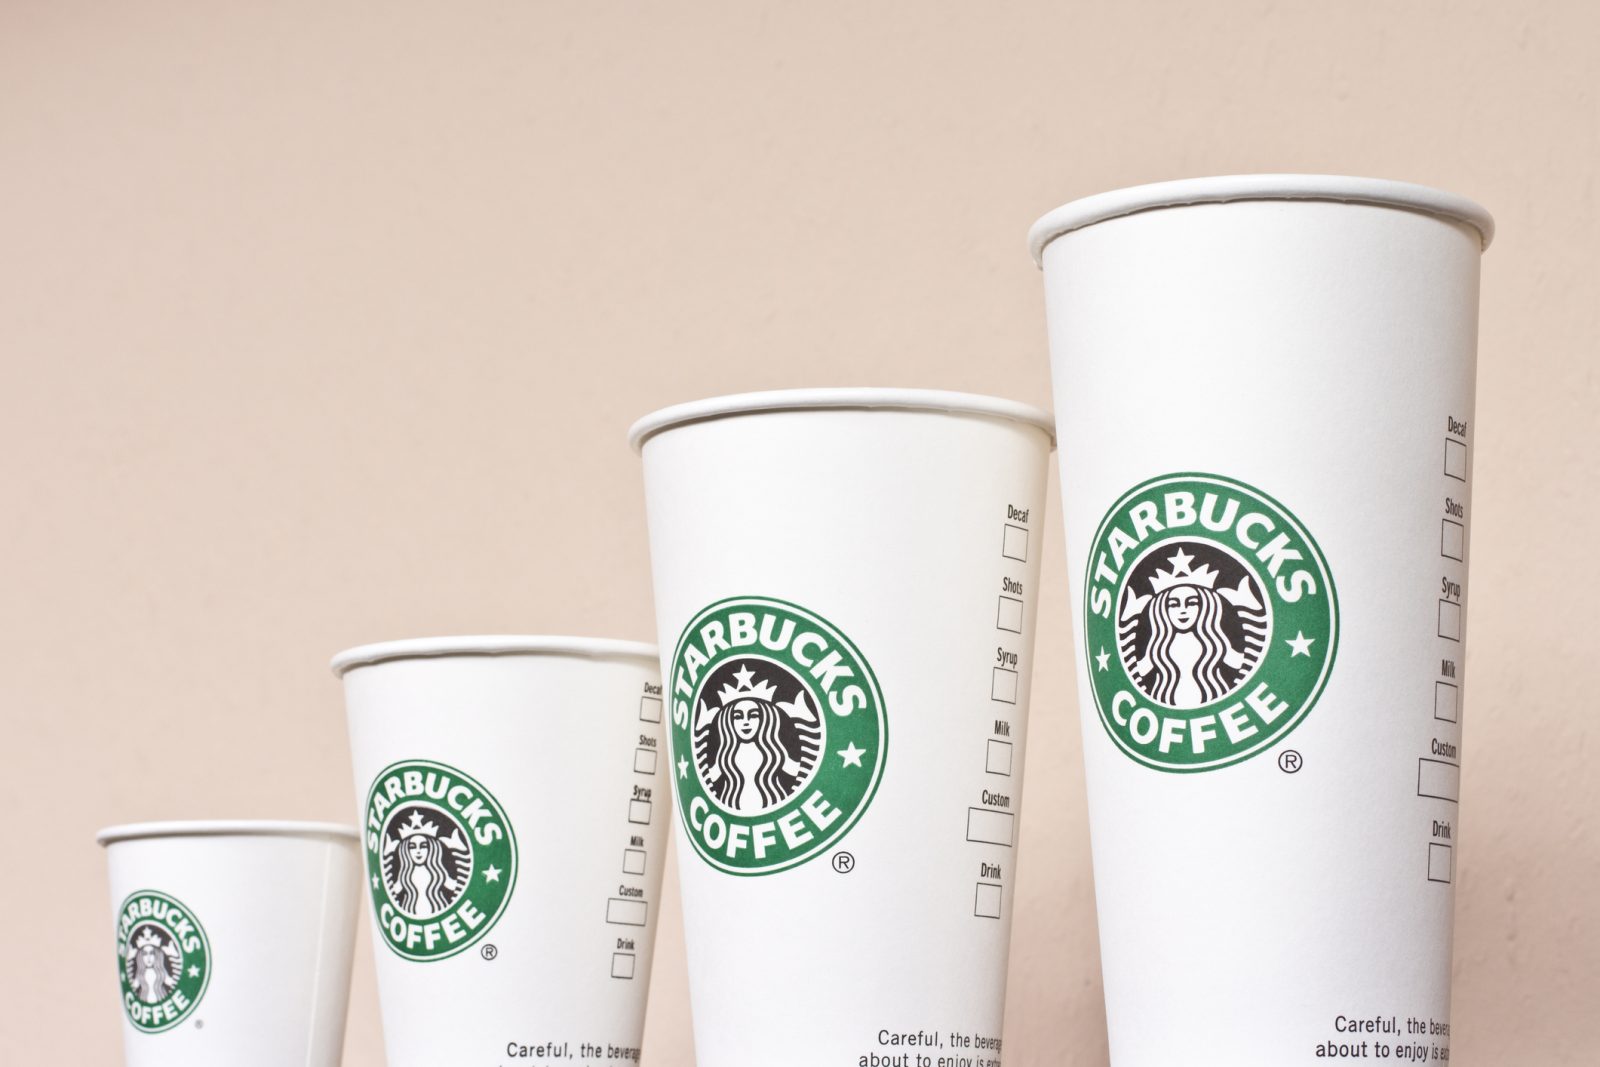 Starbucks Cup Sizes Explained The Right Way